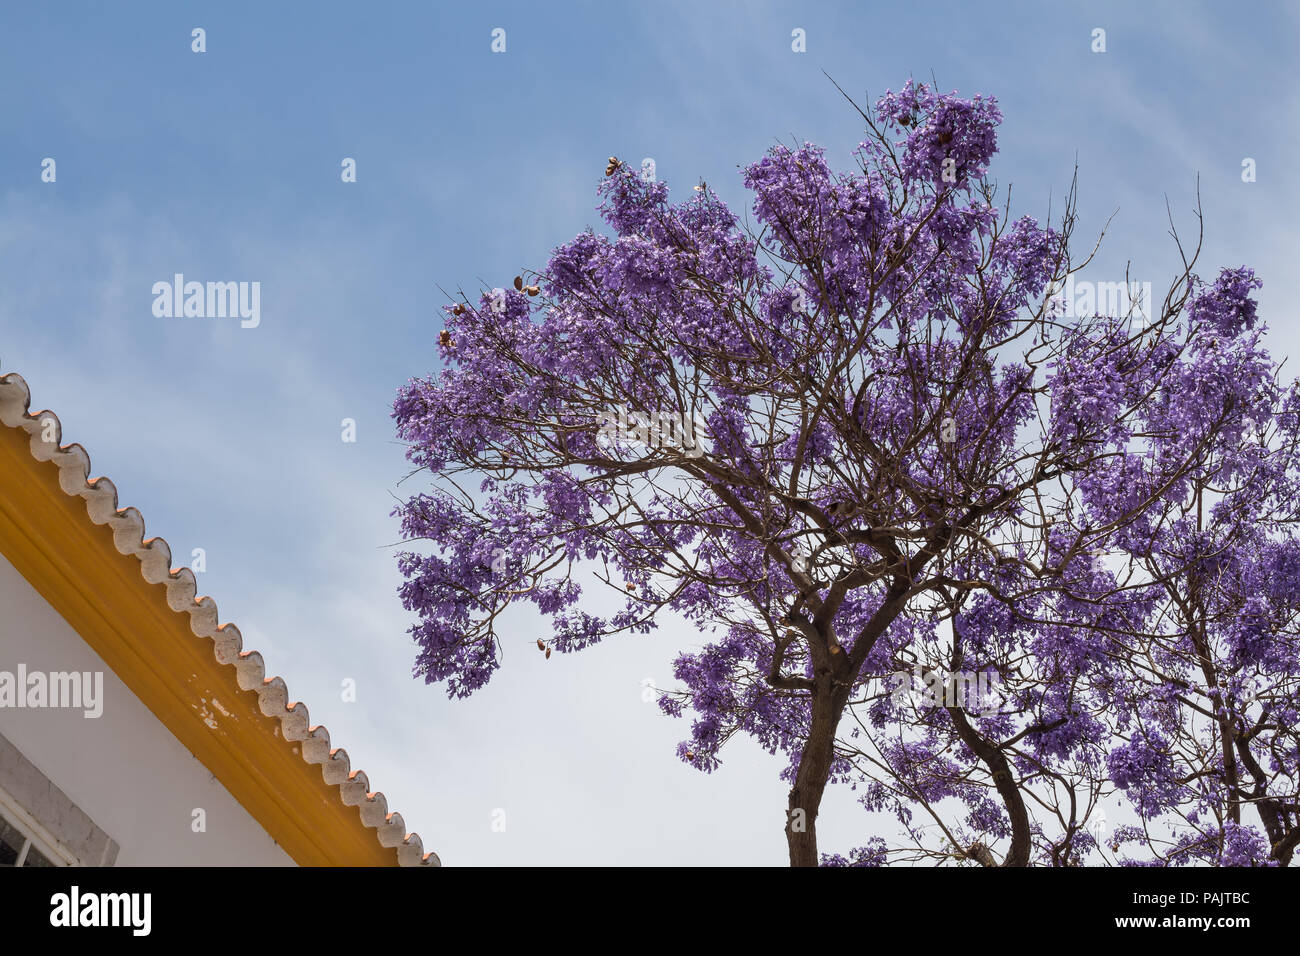 Crown of the jacaranda tree with violet flowers. Yellow line of a roof of a house with a structure of the roof tiles. Blue sky with light clouds. Lago Stock Photo